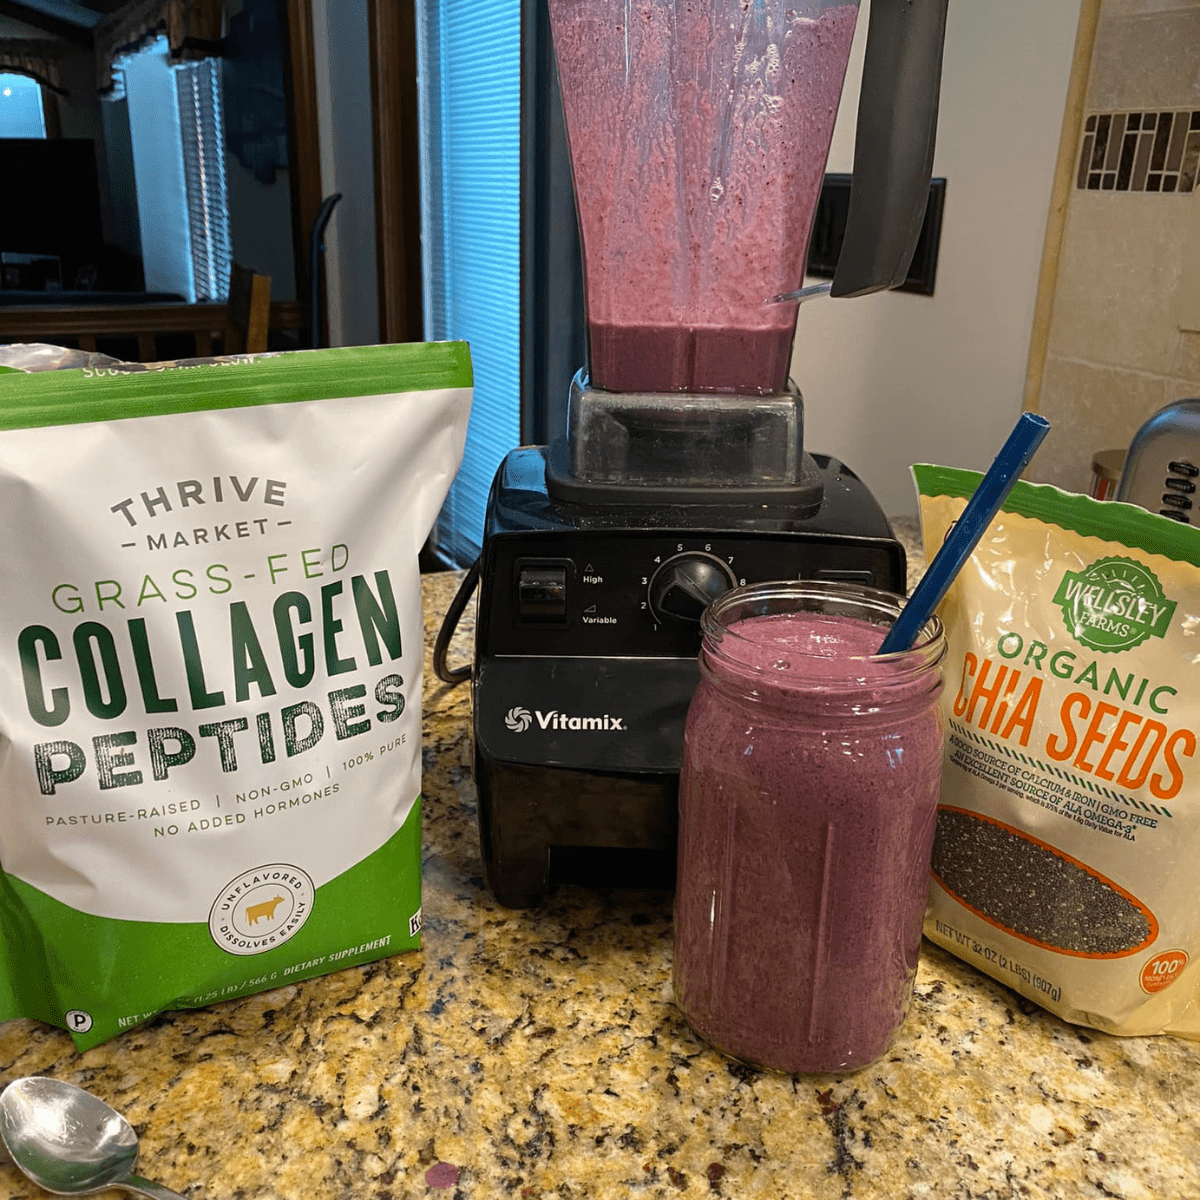 thrive market collagen next to a blueberry smoothie and chia seed bag.